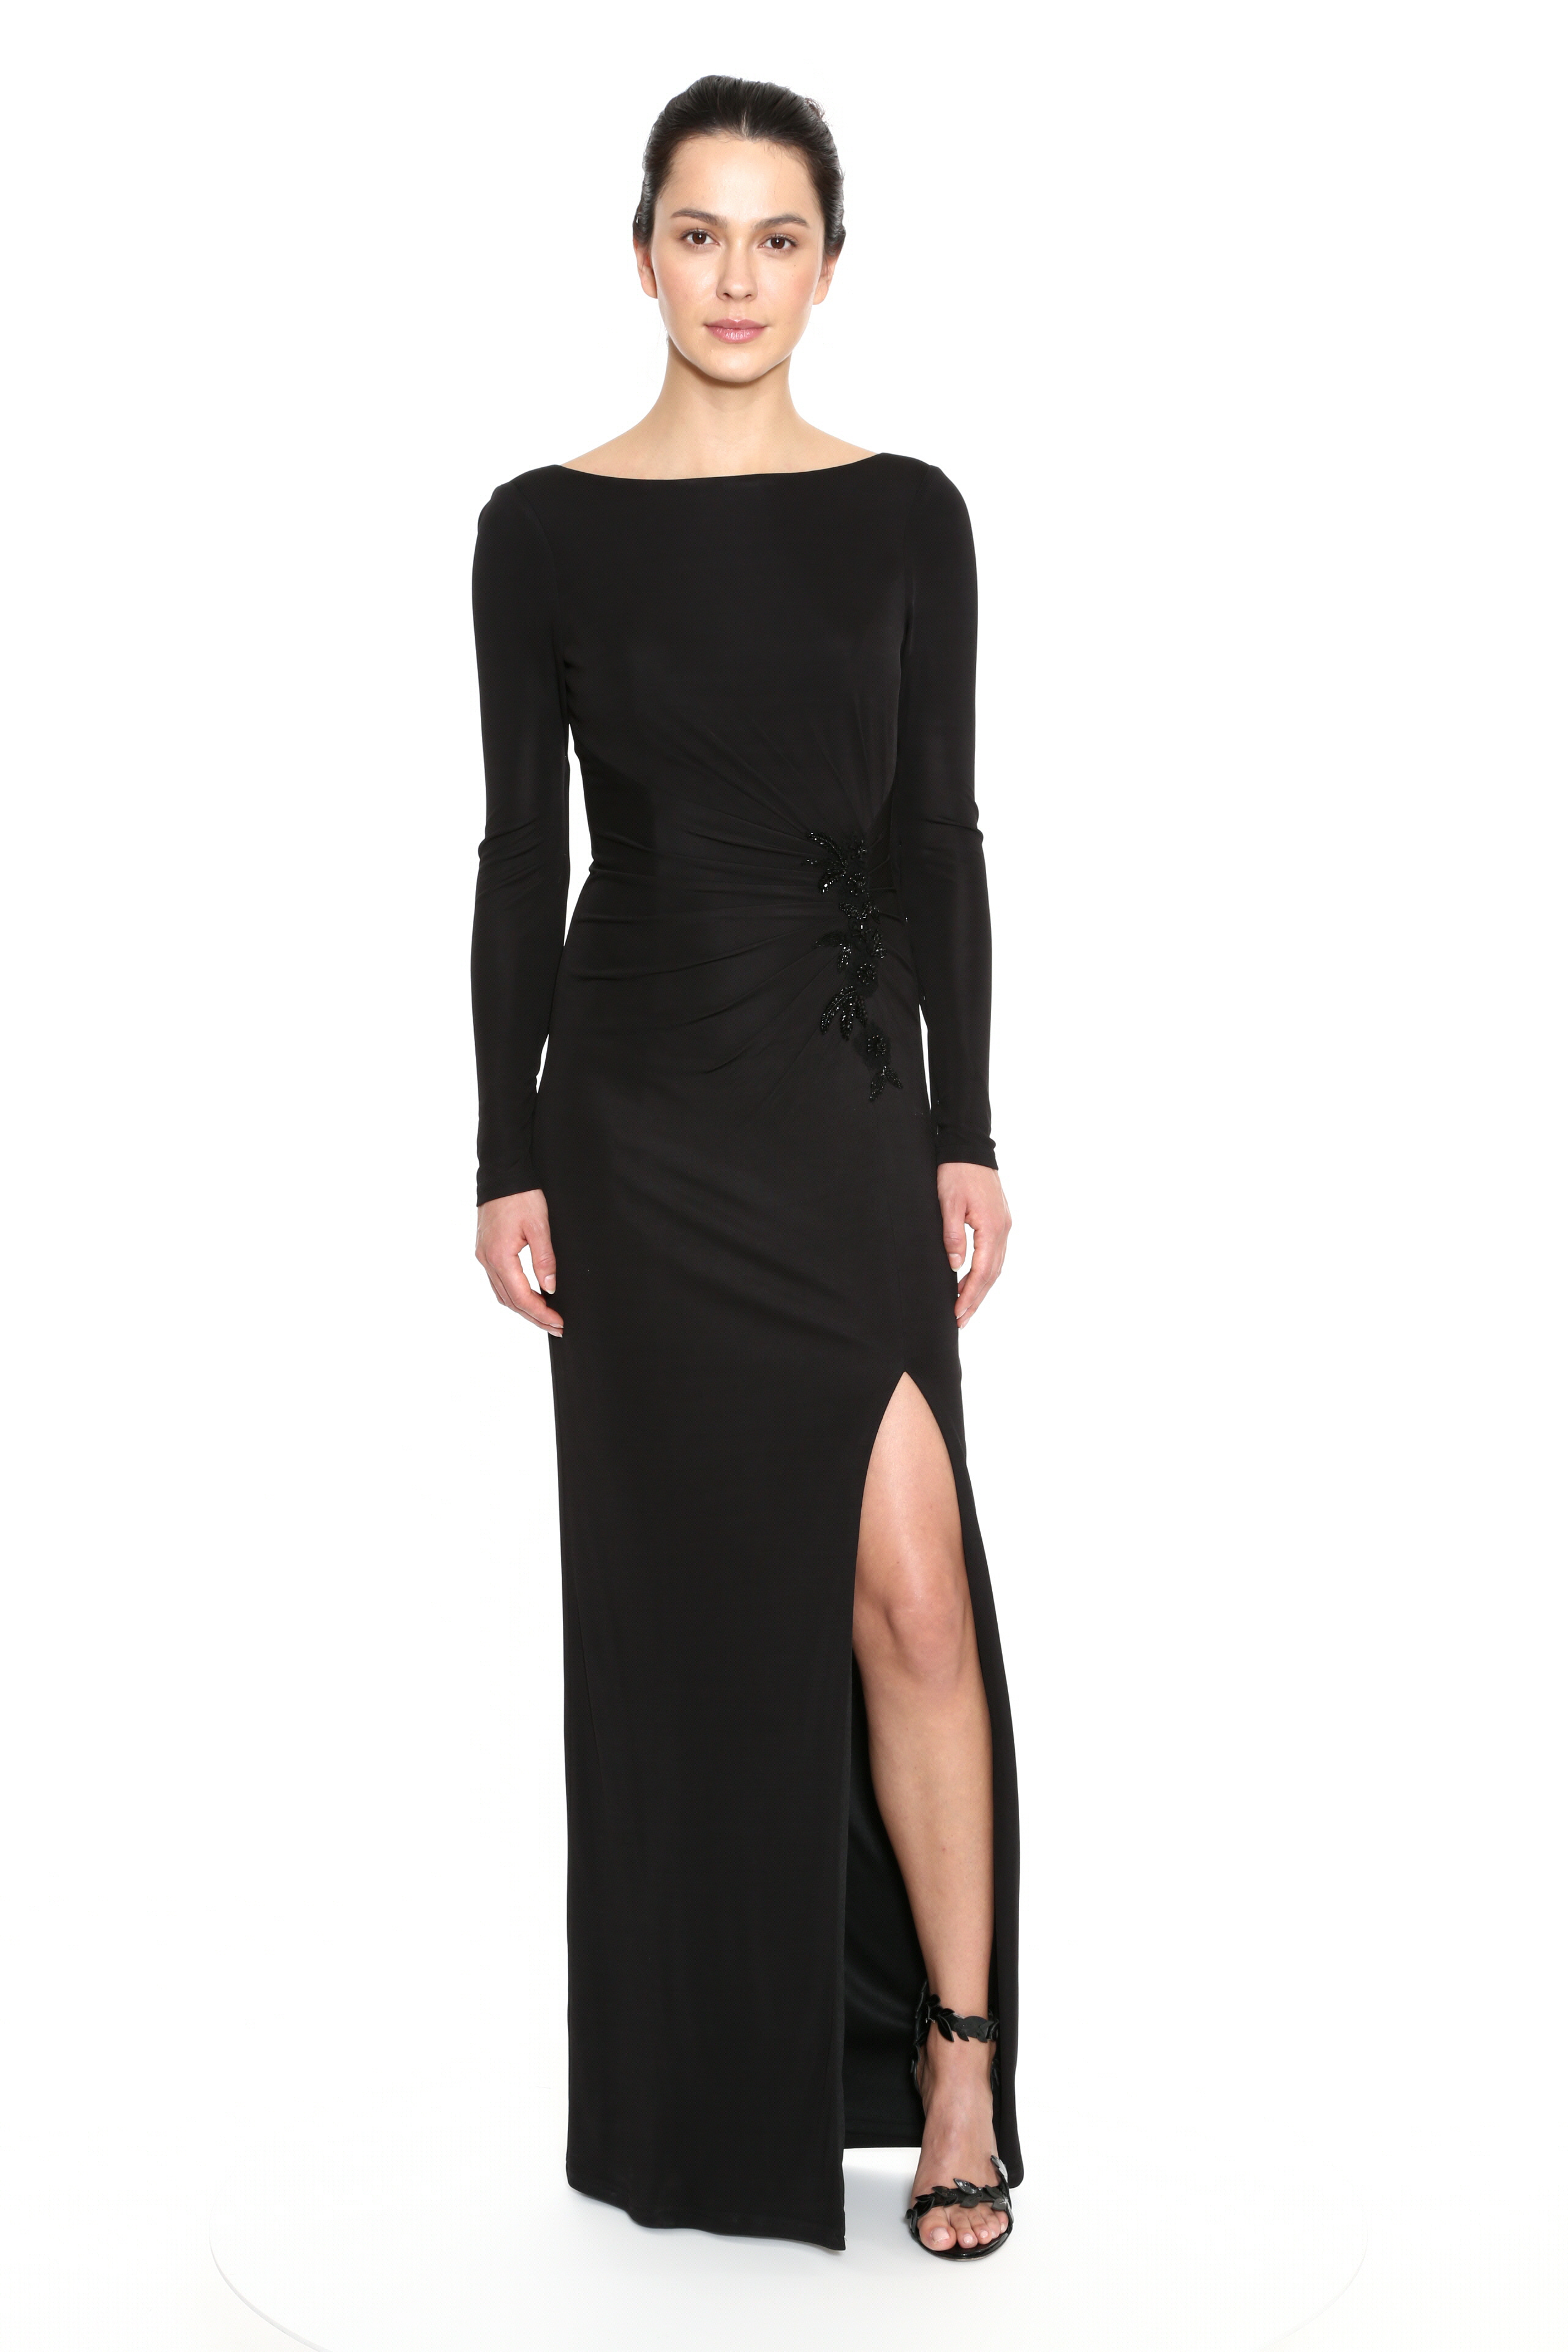 black jersey gown